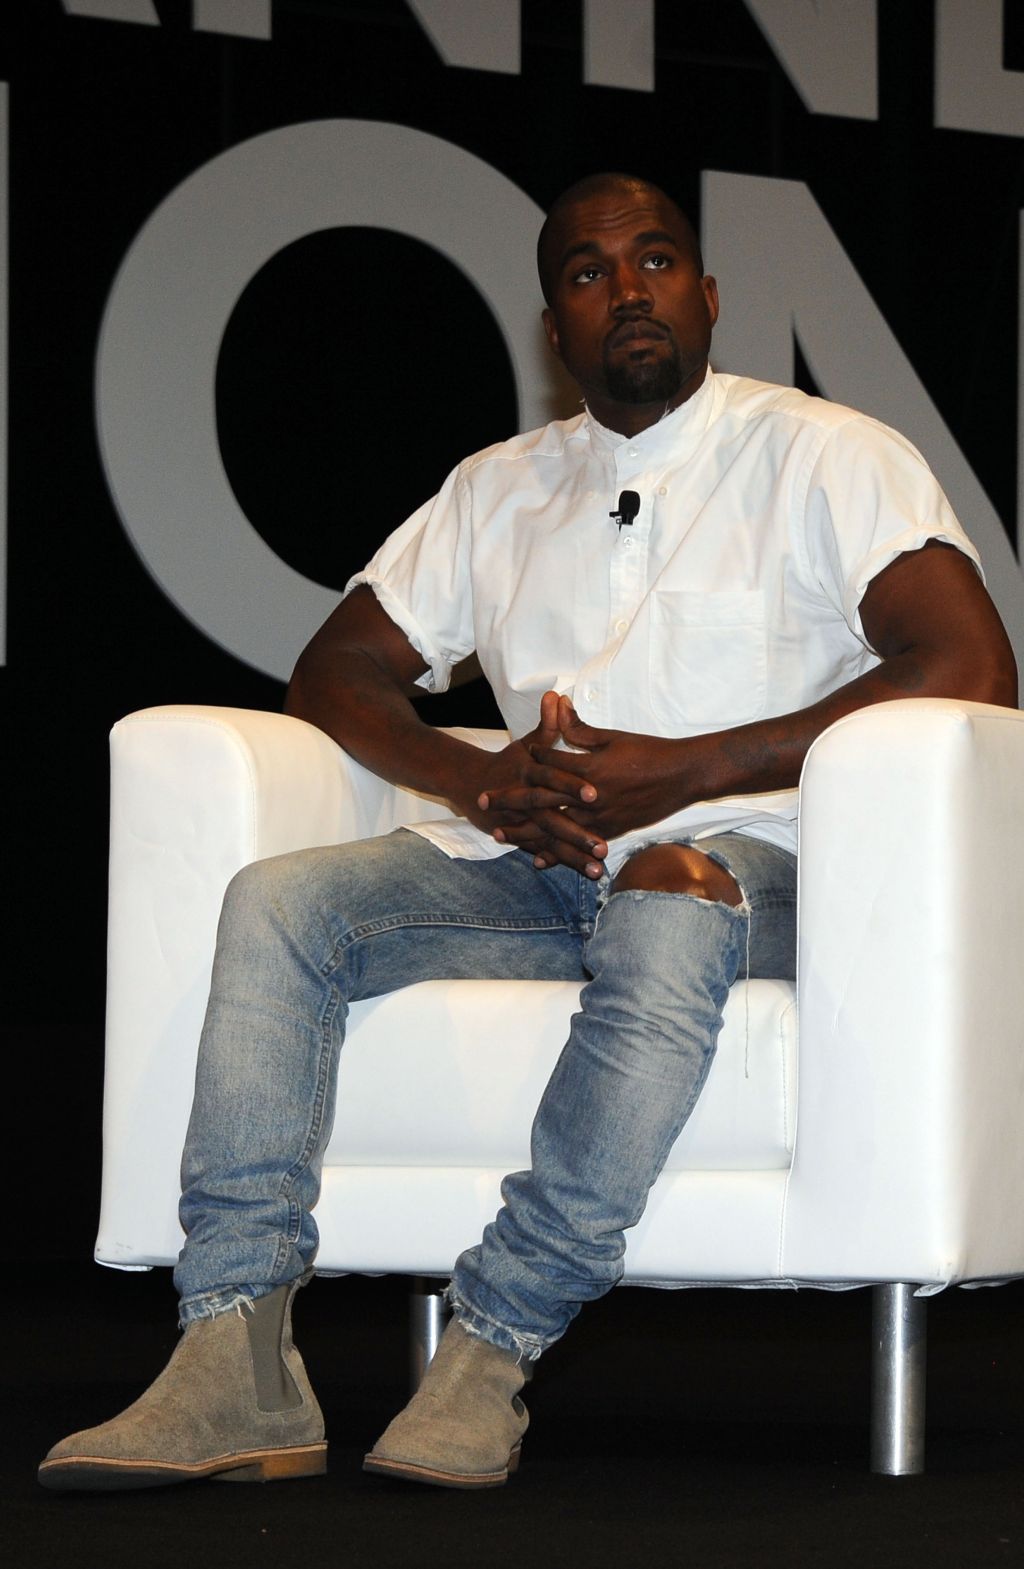 Kanye West arriving at a press conference at Cannes Lion's International Festival of Creativity